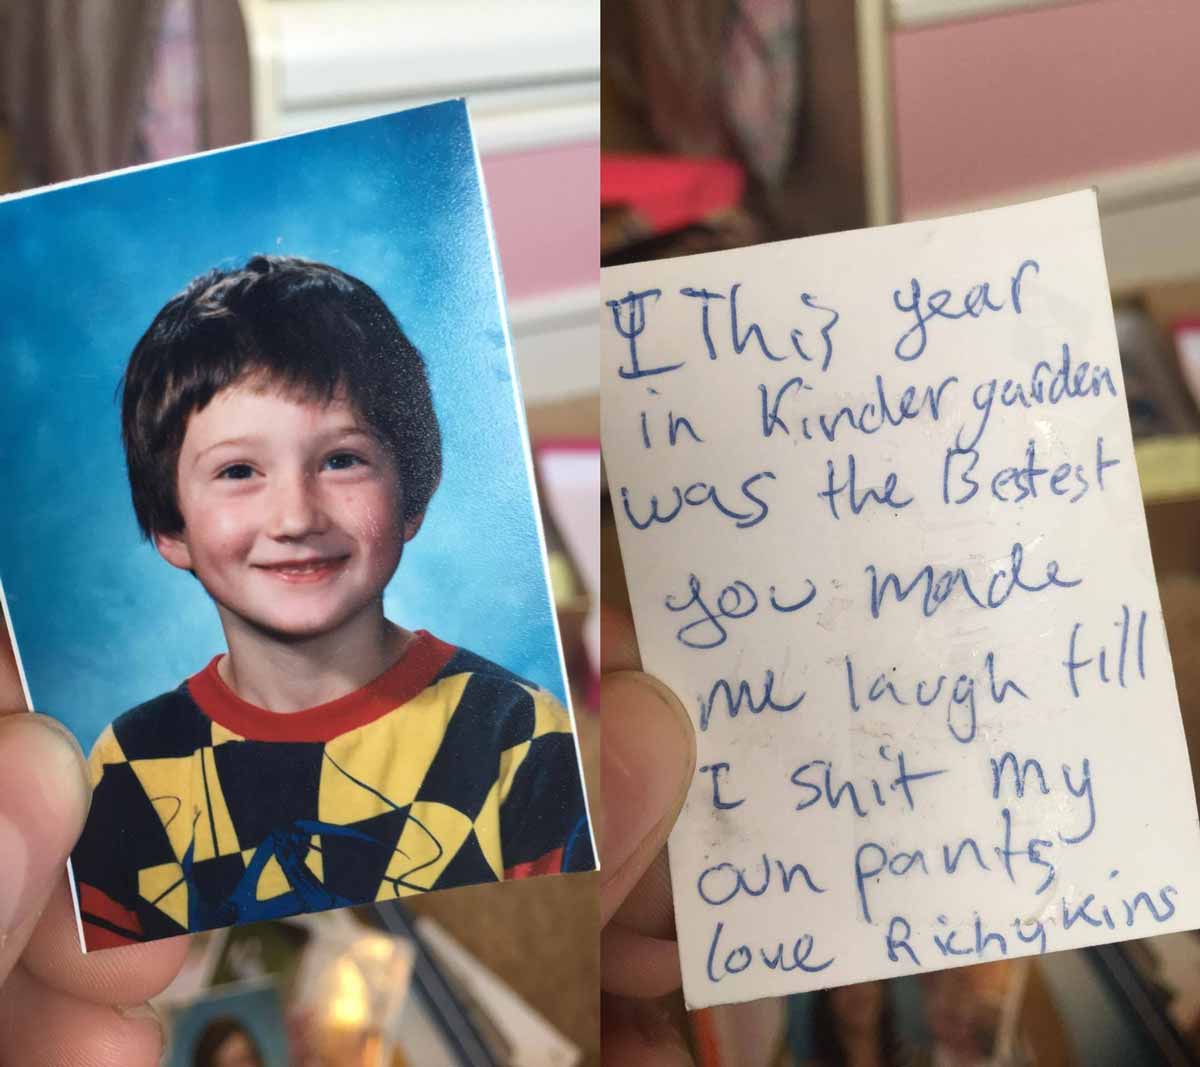 Funny school picture of a little boy and on the back he signed it 'This year in kindergarten was the bestest you made me laugh till i shit my own pants, love Richy kins'